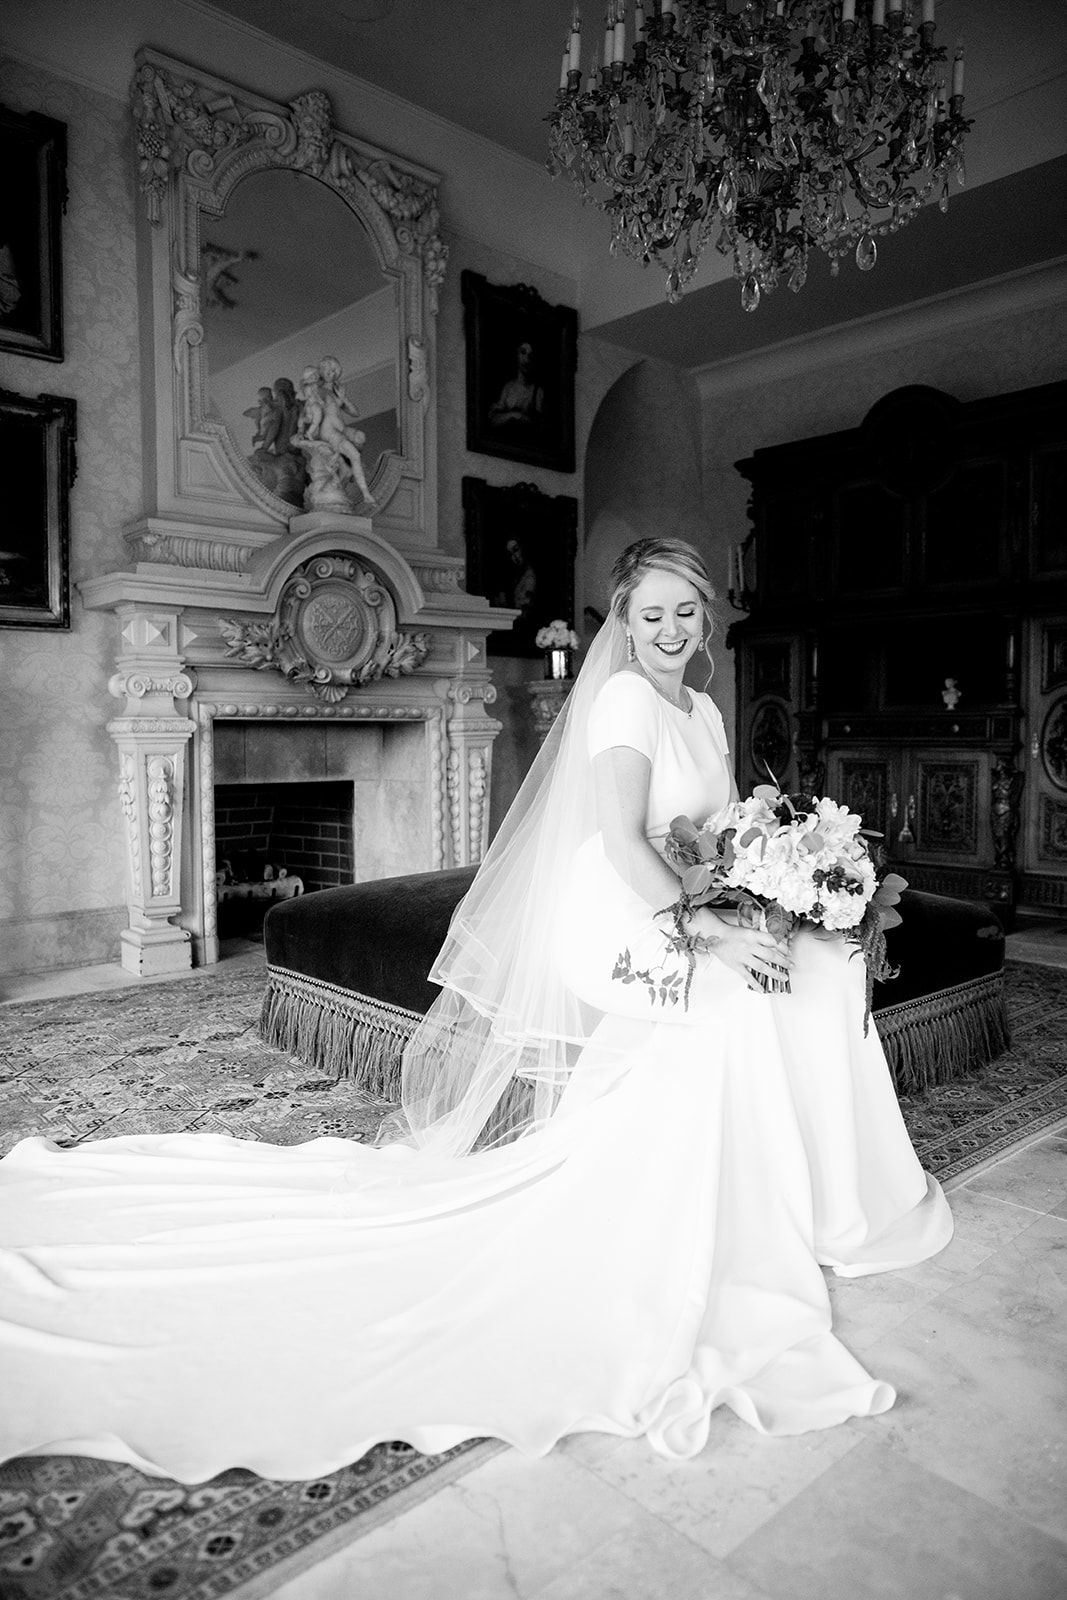 Abby  Jimmys Wedding at Dover Hall Estate - Image Property of www.j-dphoto.com